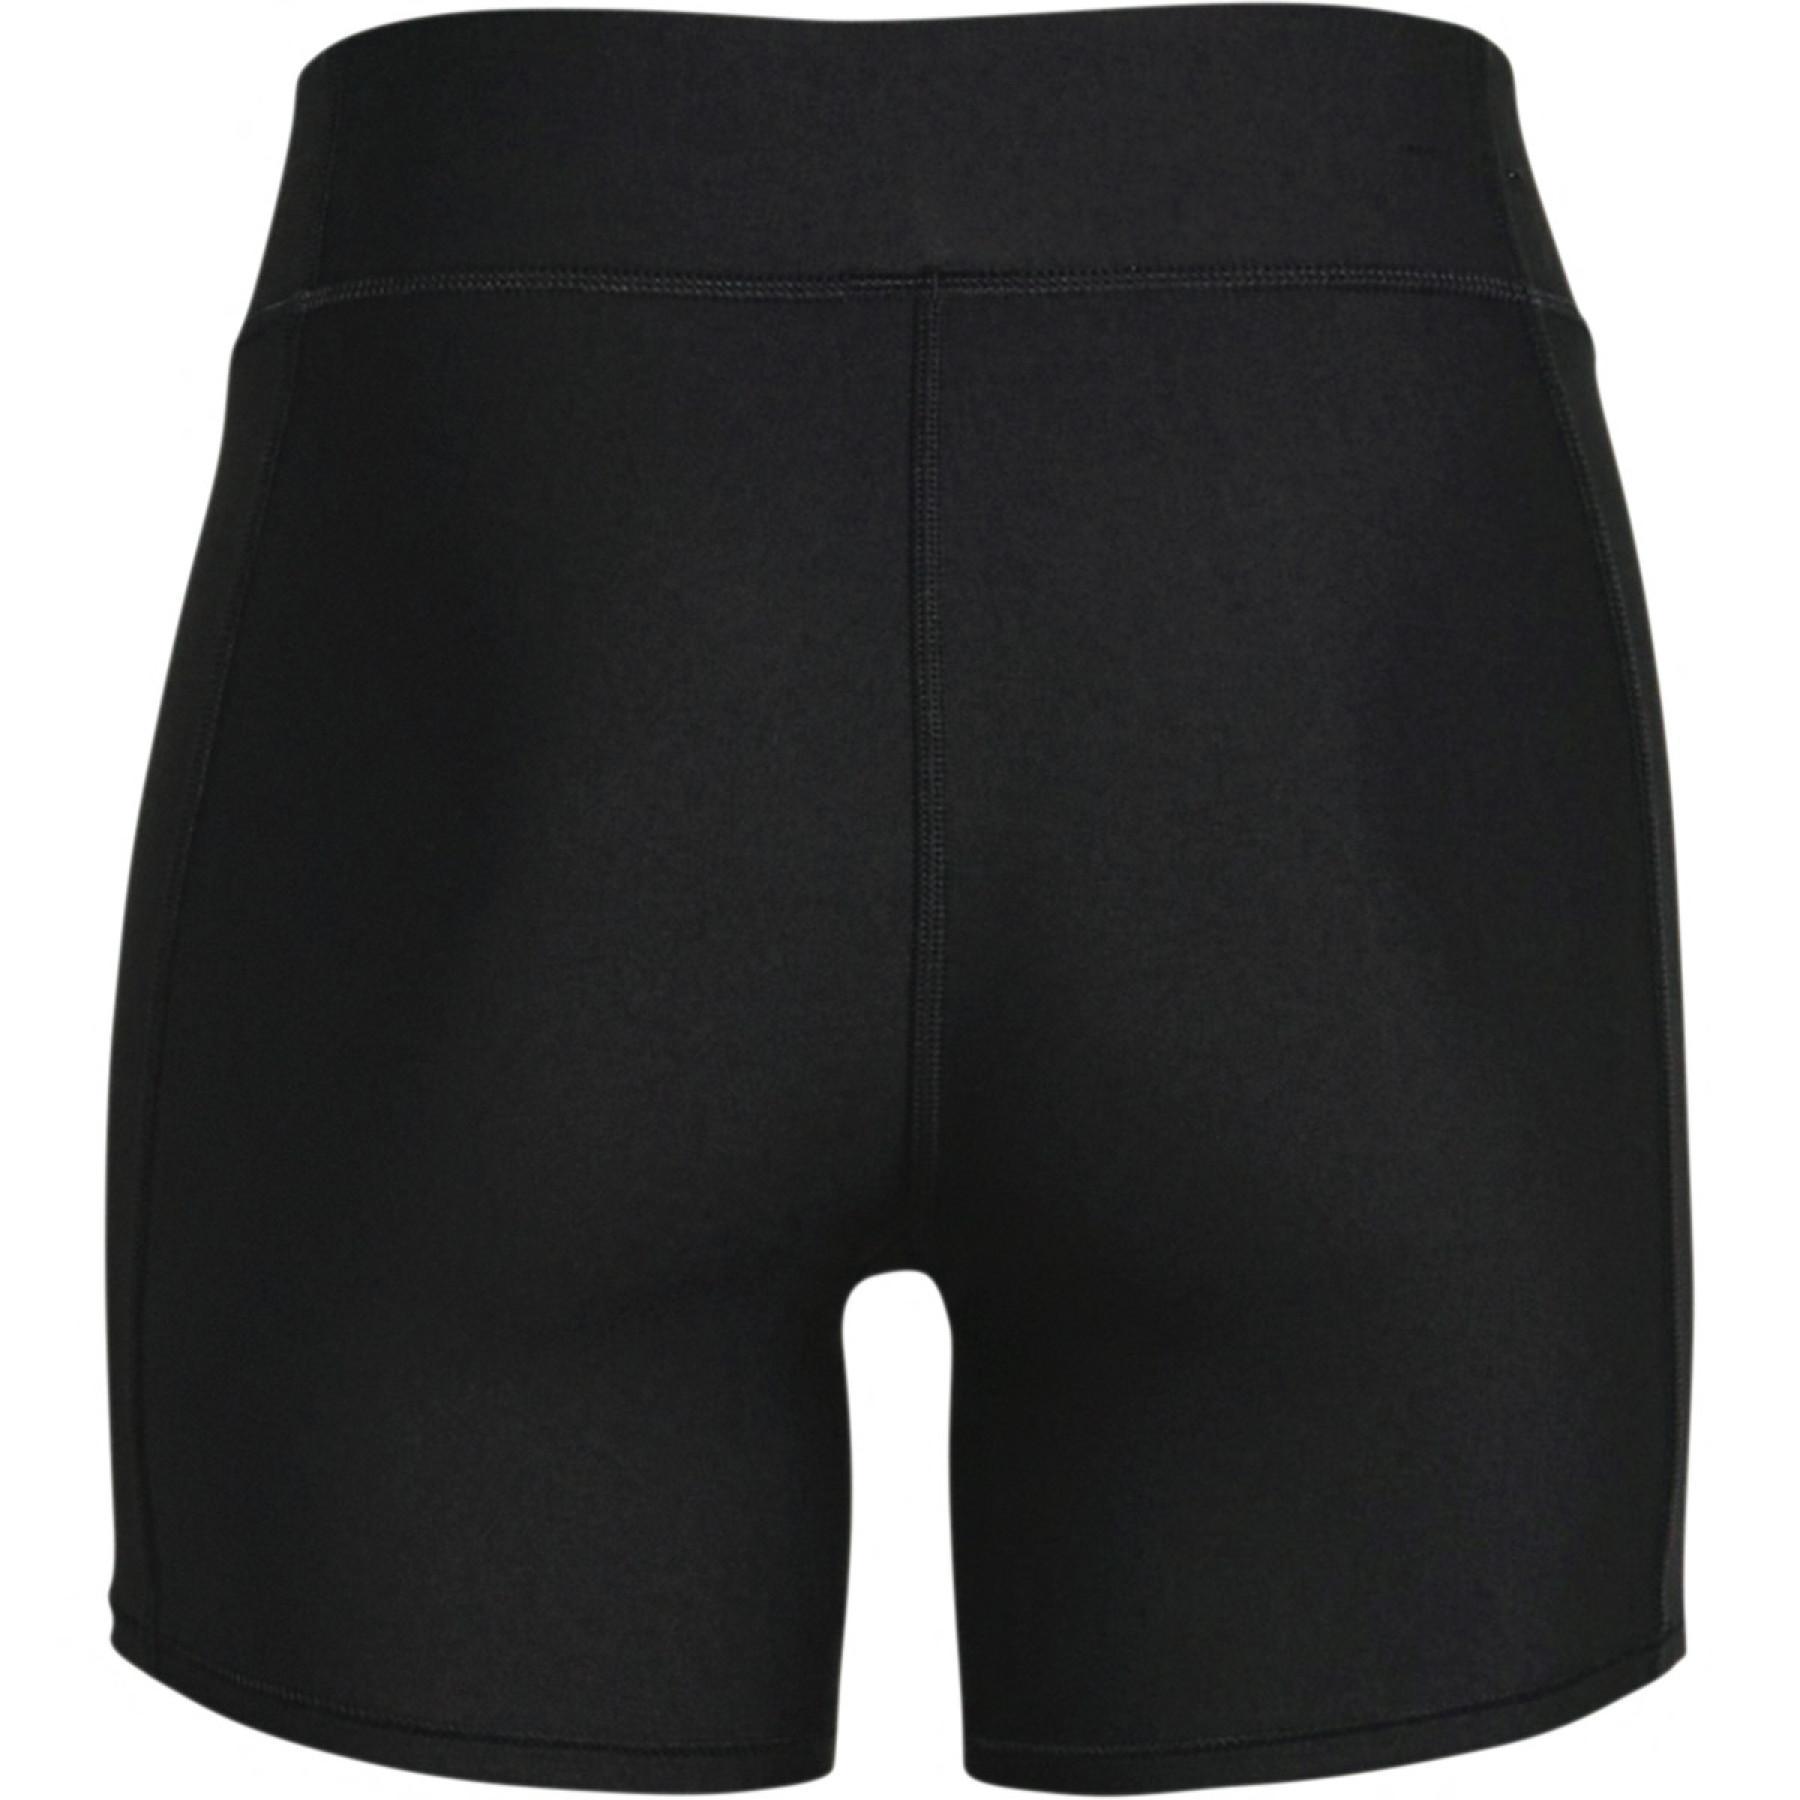 Women's mid-rise shorts Under Armour Middy